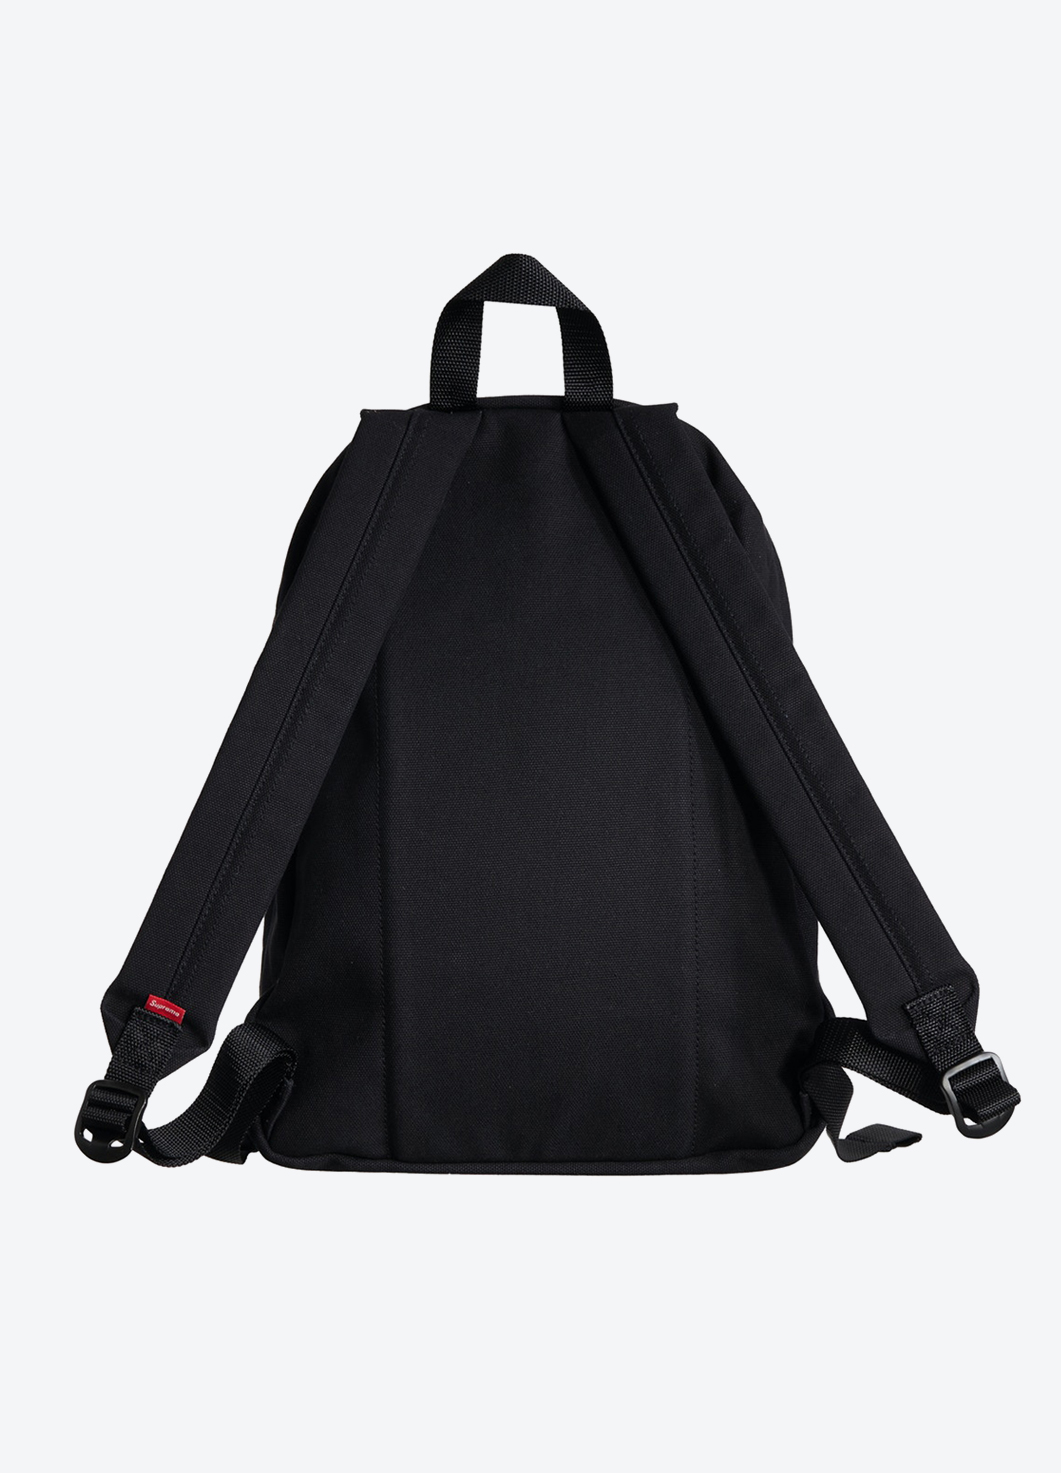 Supreme Canvas Backpack Black – Watch my Watch